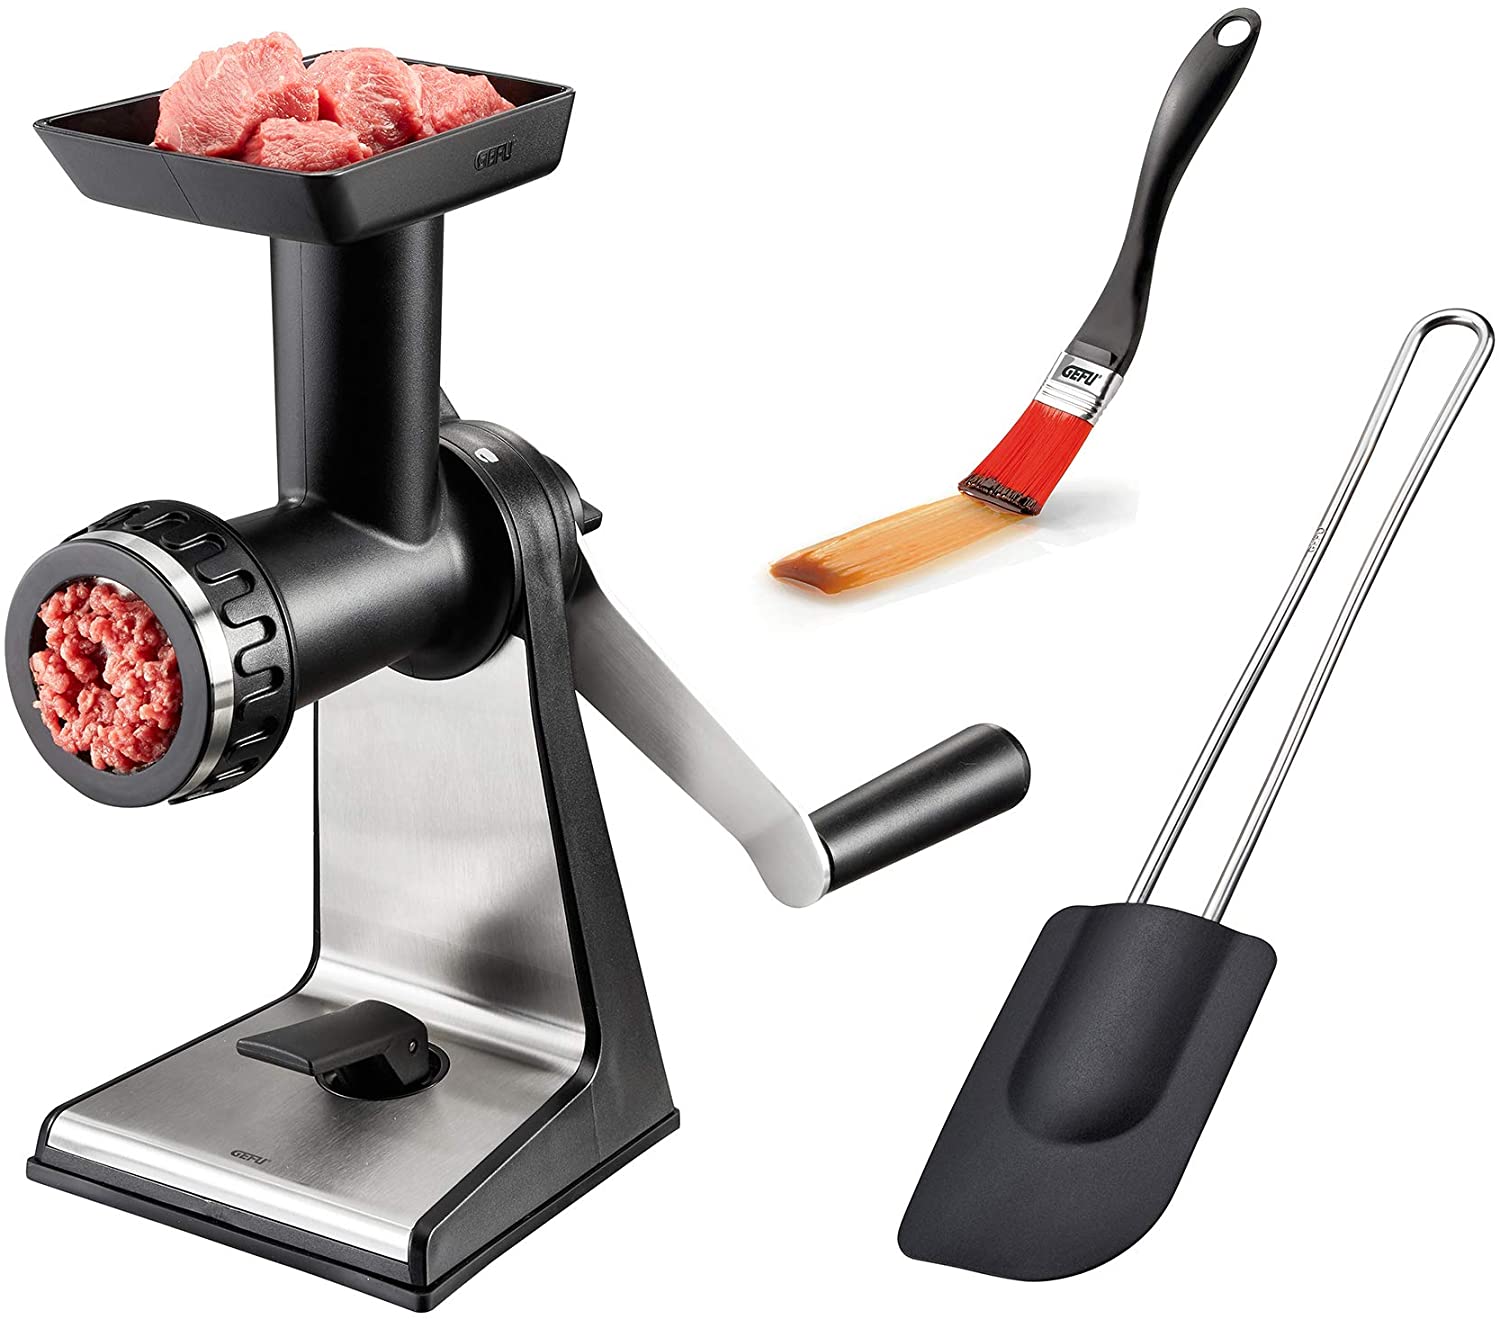 Gefu Meat Mincer with Forma – Set with Biscuit Attachment, Basting Brush and Spatula